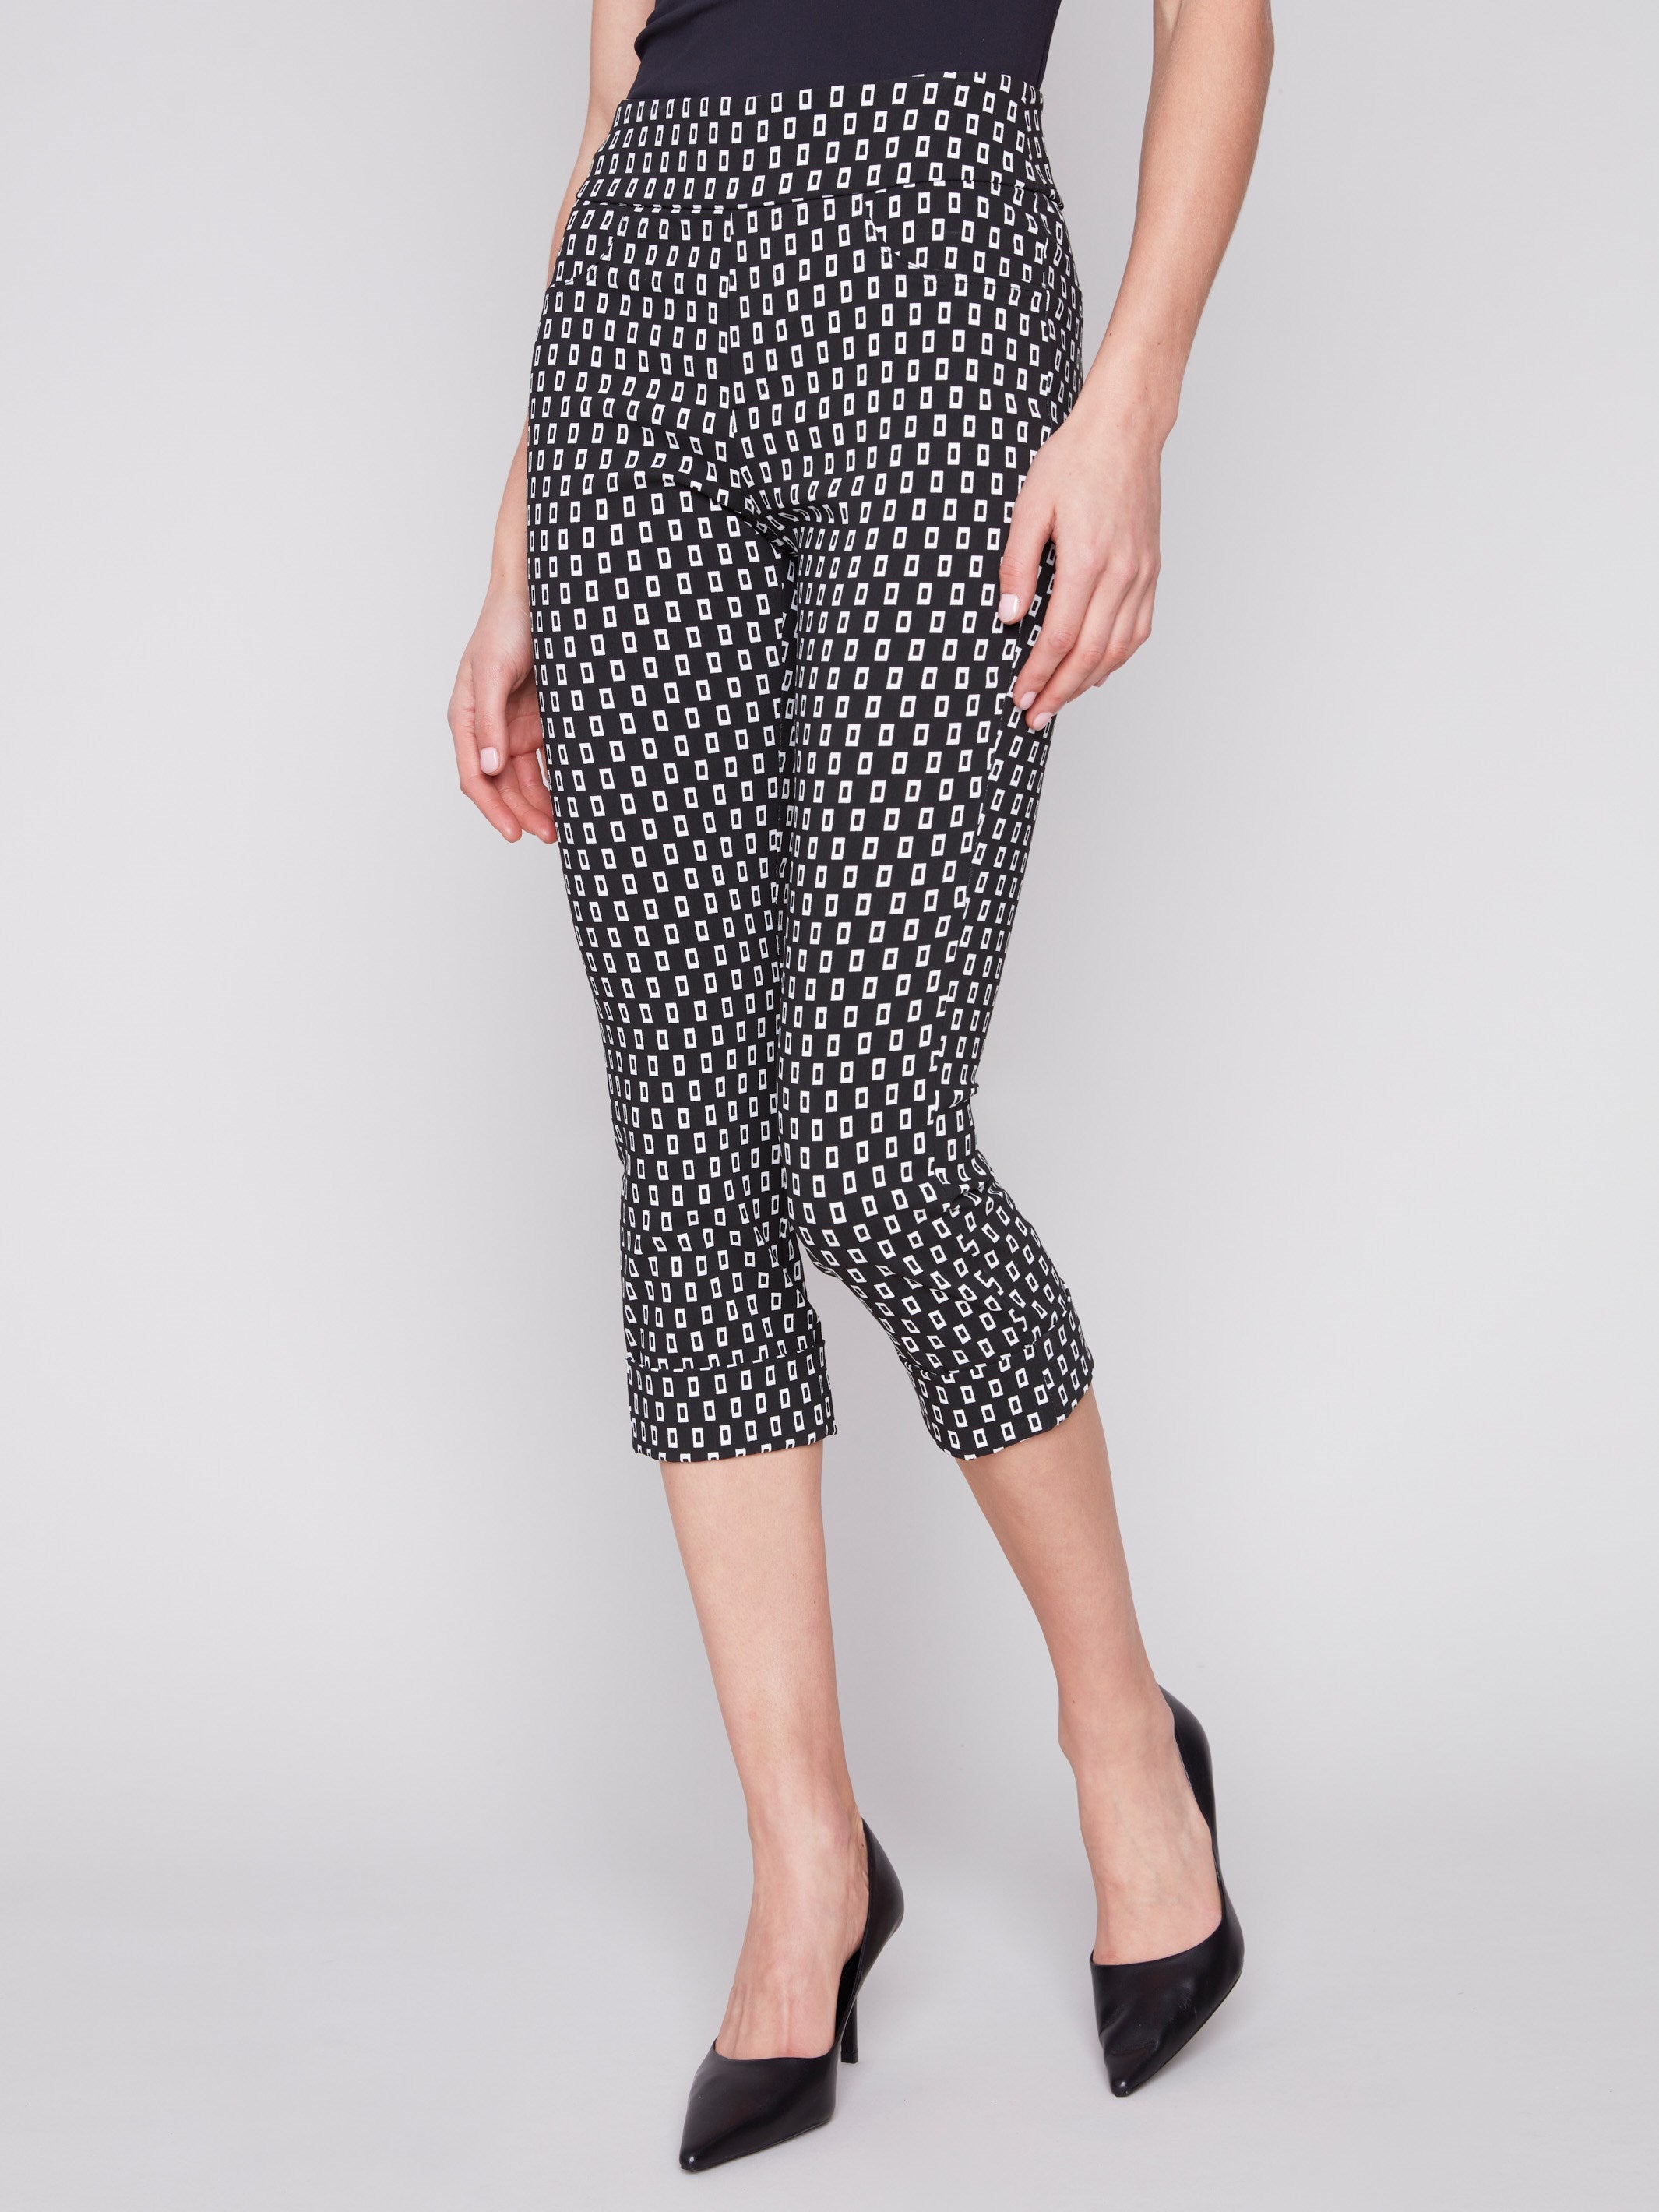 Printed Stretch Pull-On Capri Pants - White Tiles - Charlie B Collection Canada - Image 2